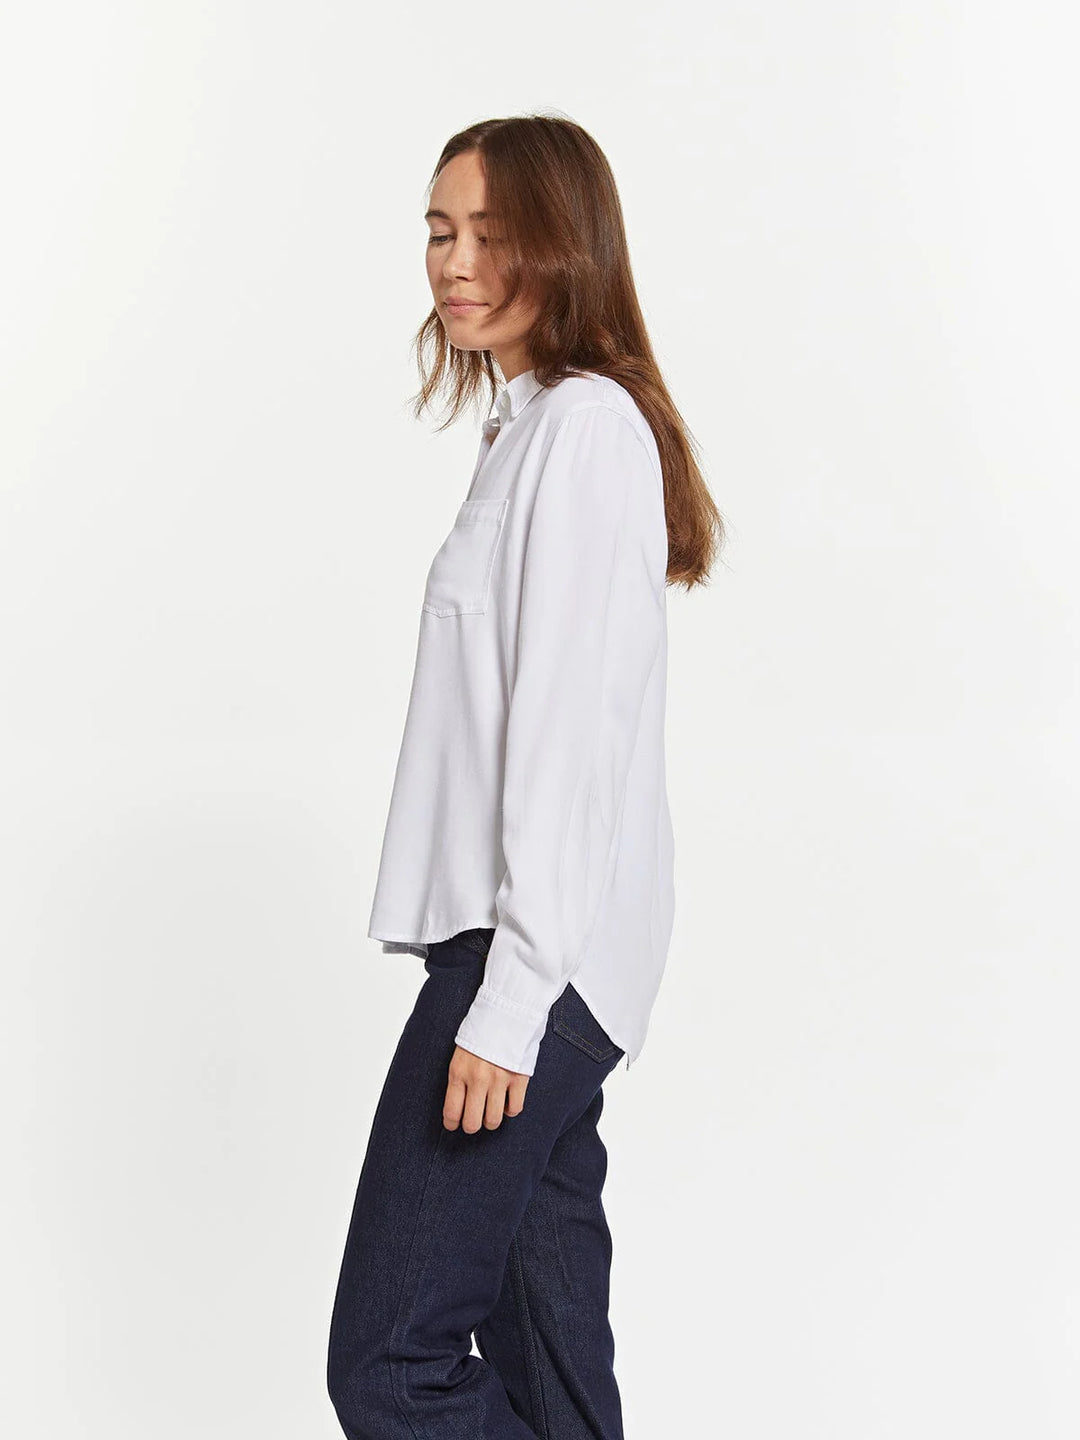 Penny The Classic White Button Down Top - 22 Palms Boutique